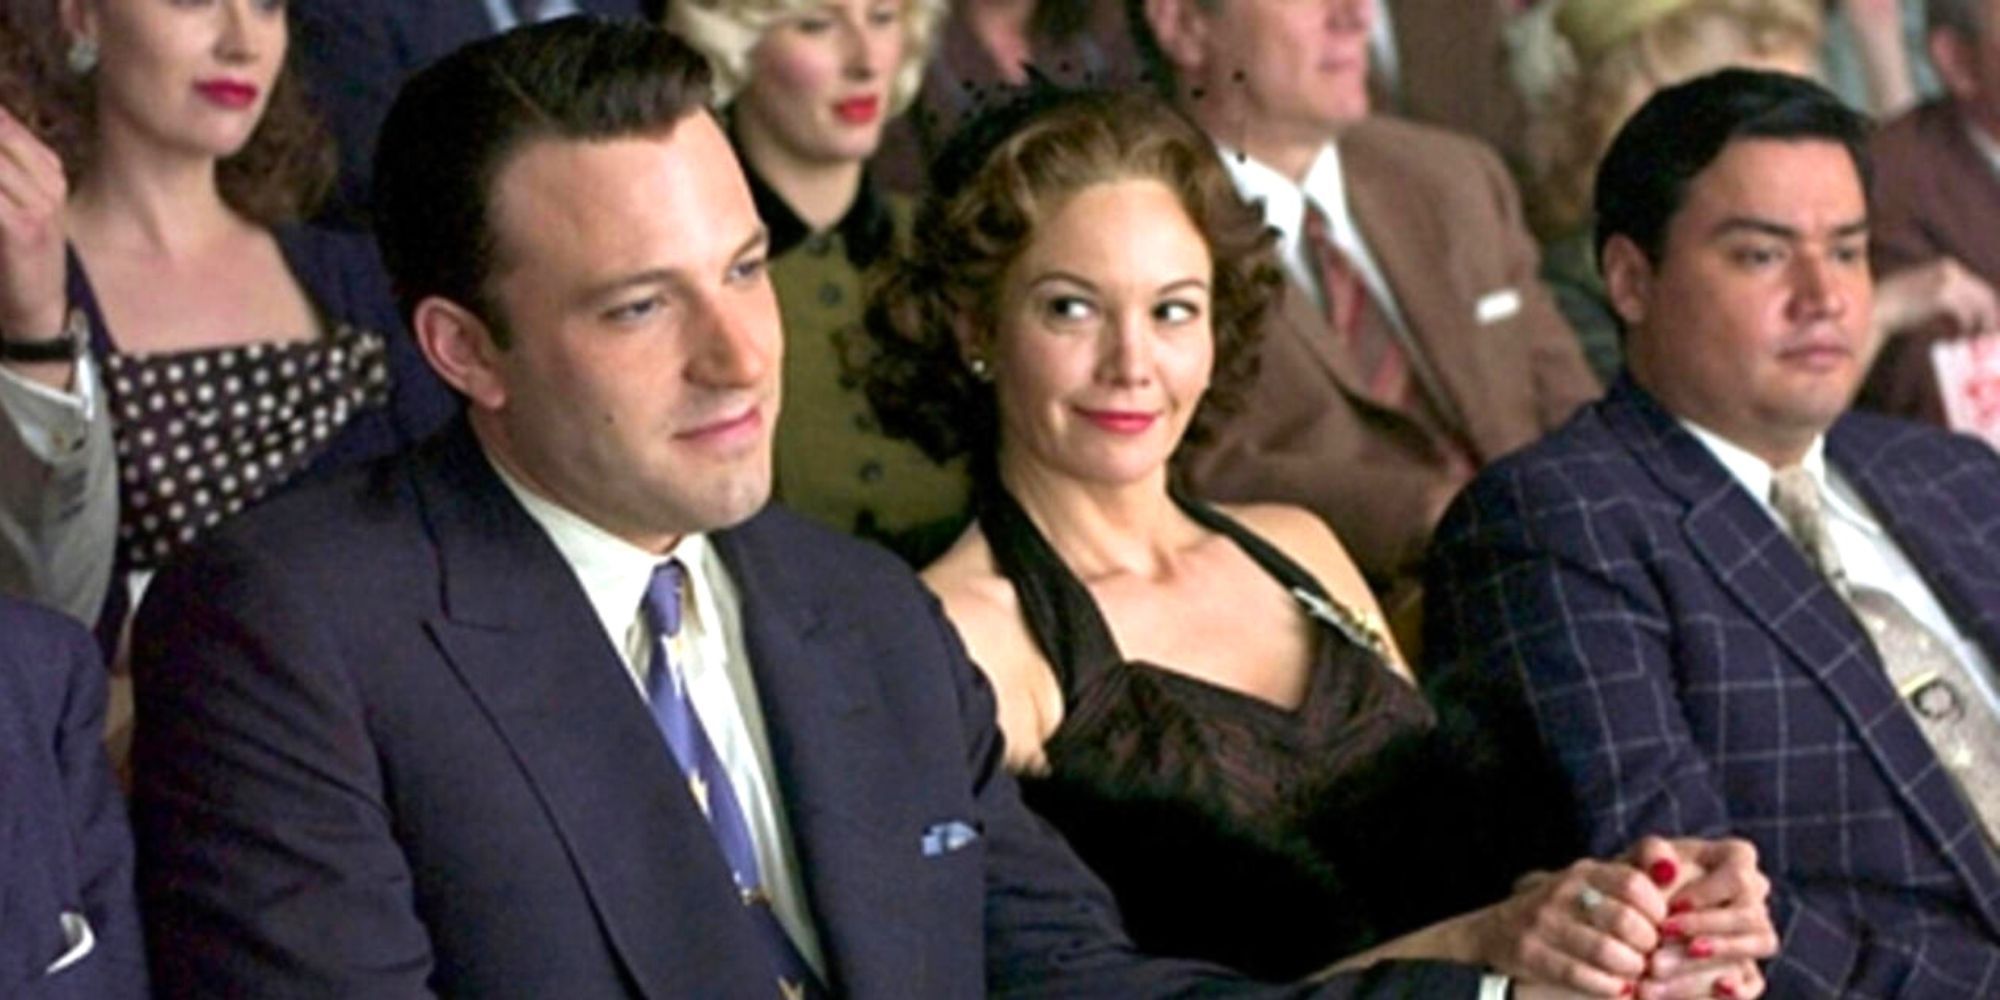 Ben Affleck sitting next to Diane Lane in a crowd of people holding hands in Hollywoodland